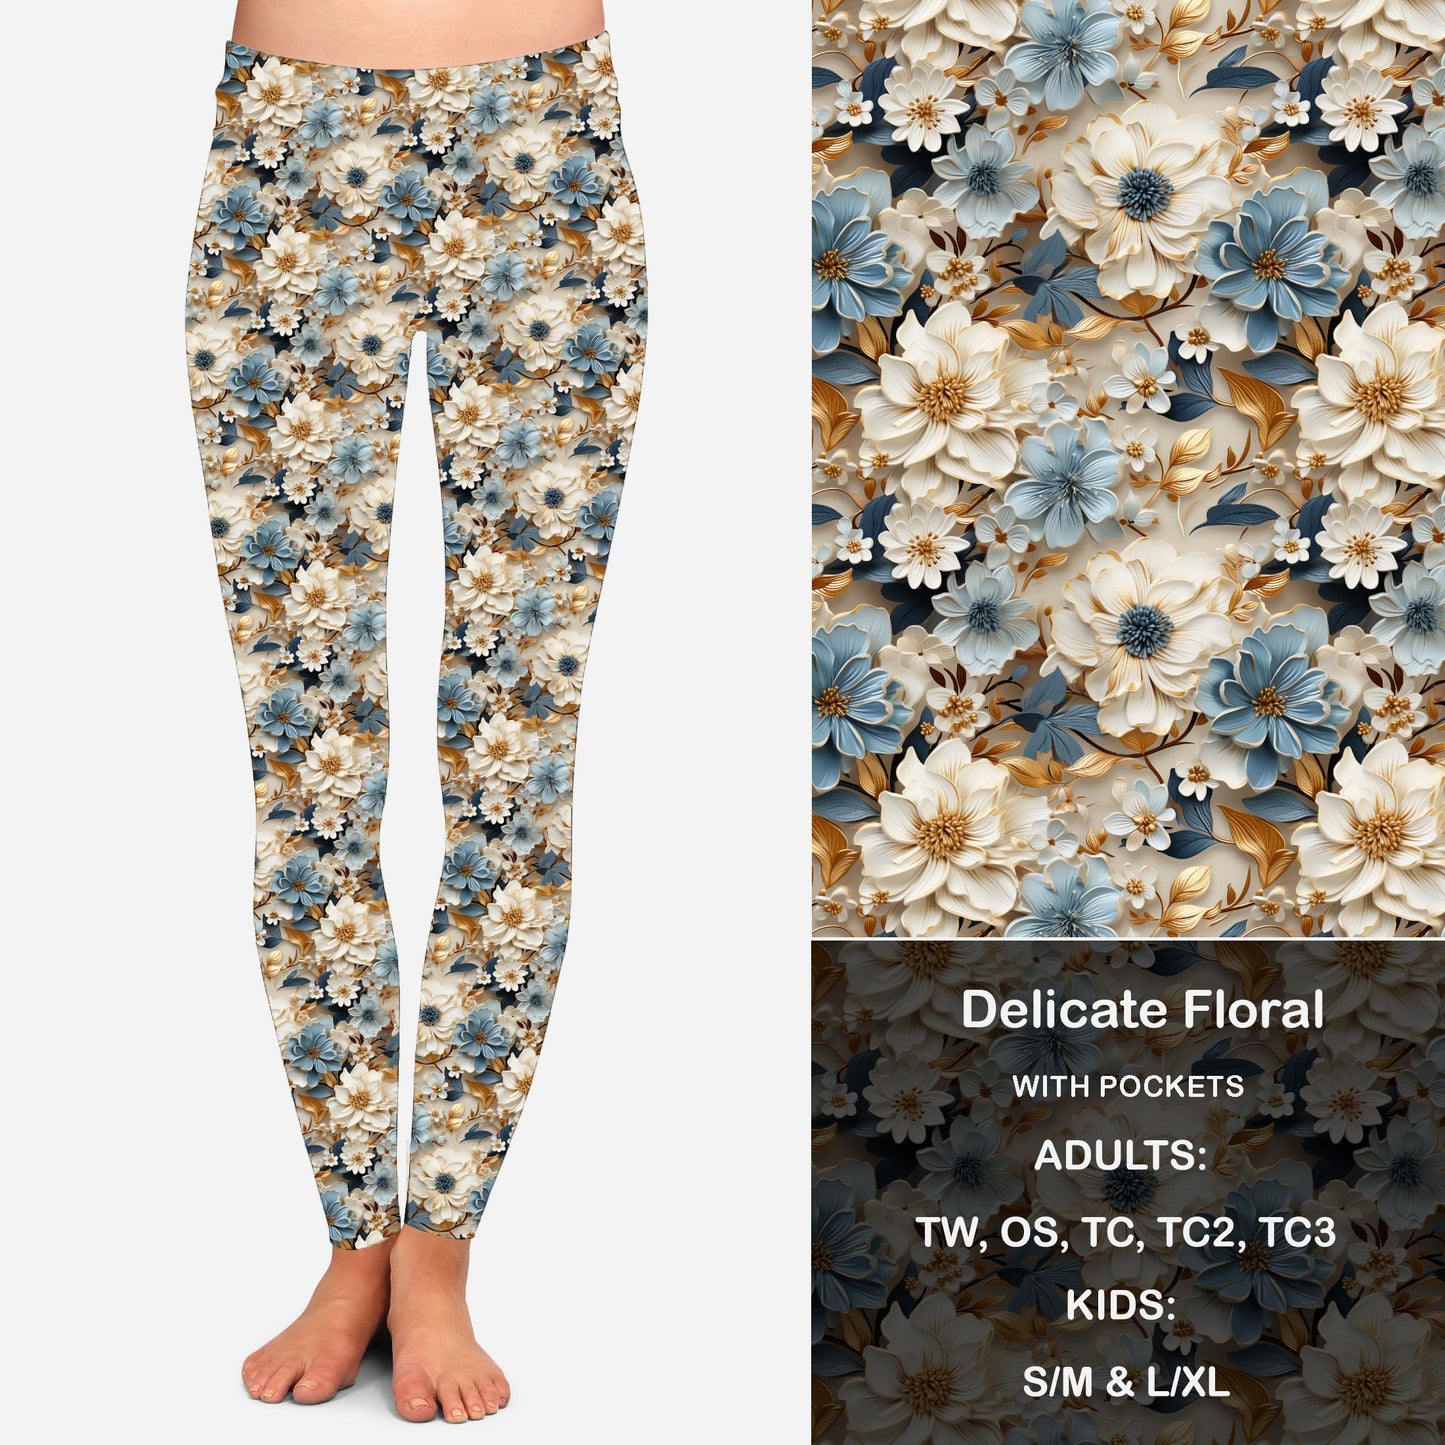 Delicate Floral Leggings with Pockets